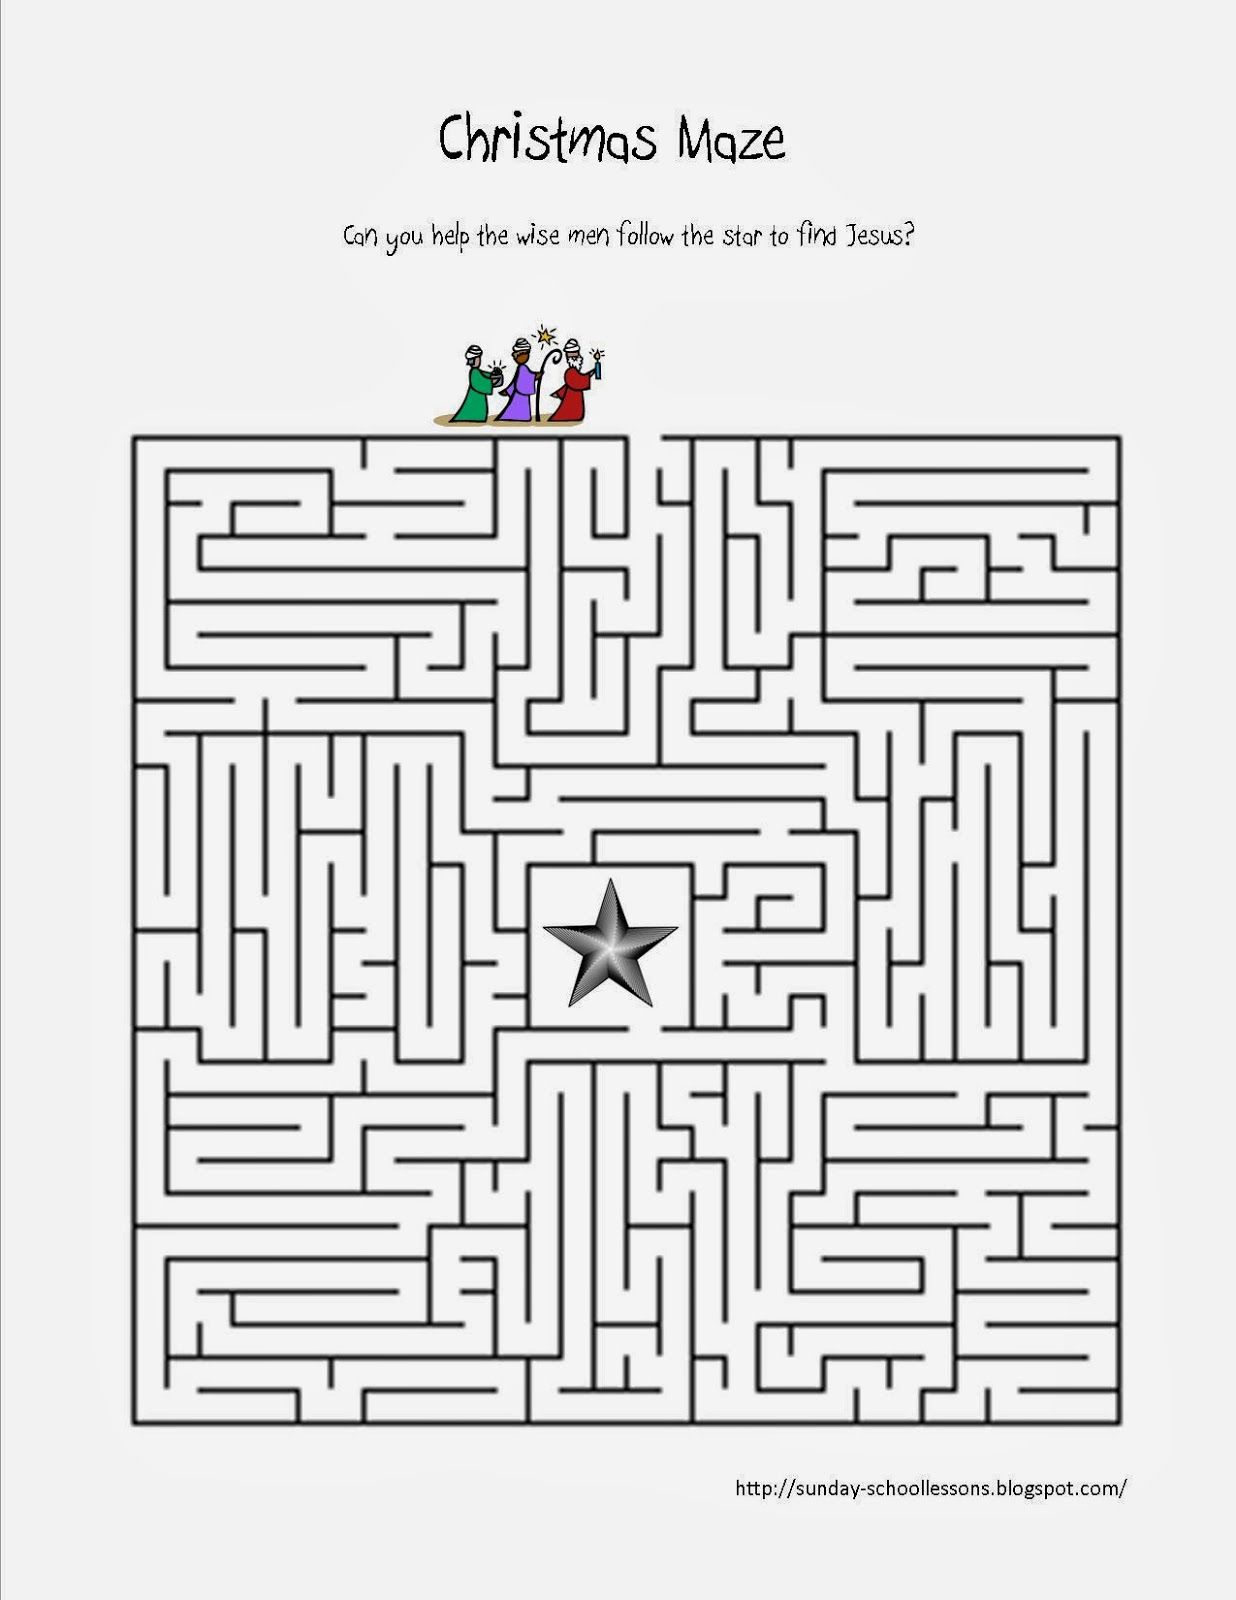 Print This Free Christmas Maze About Following The Star To